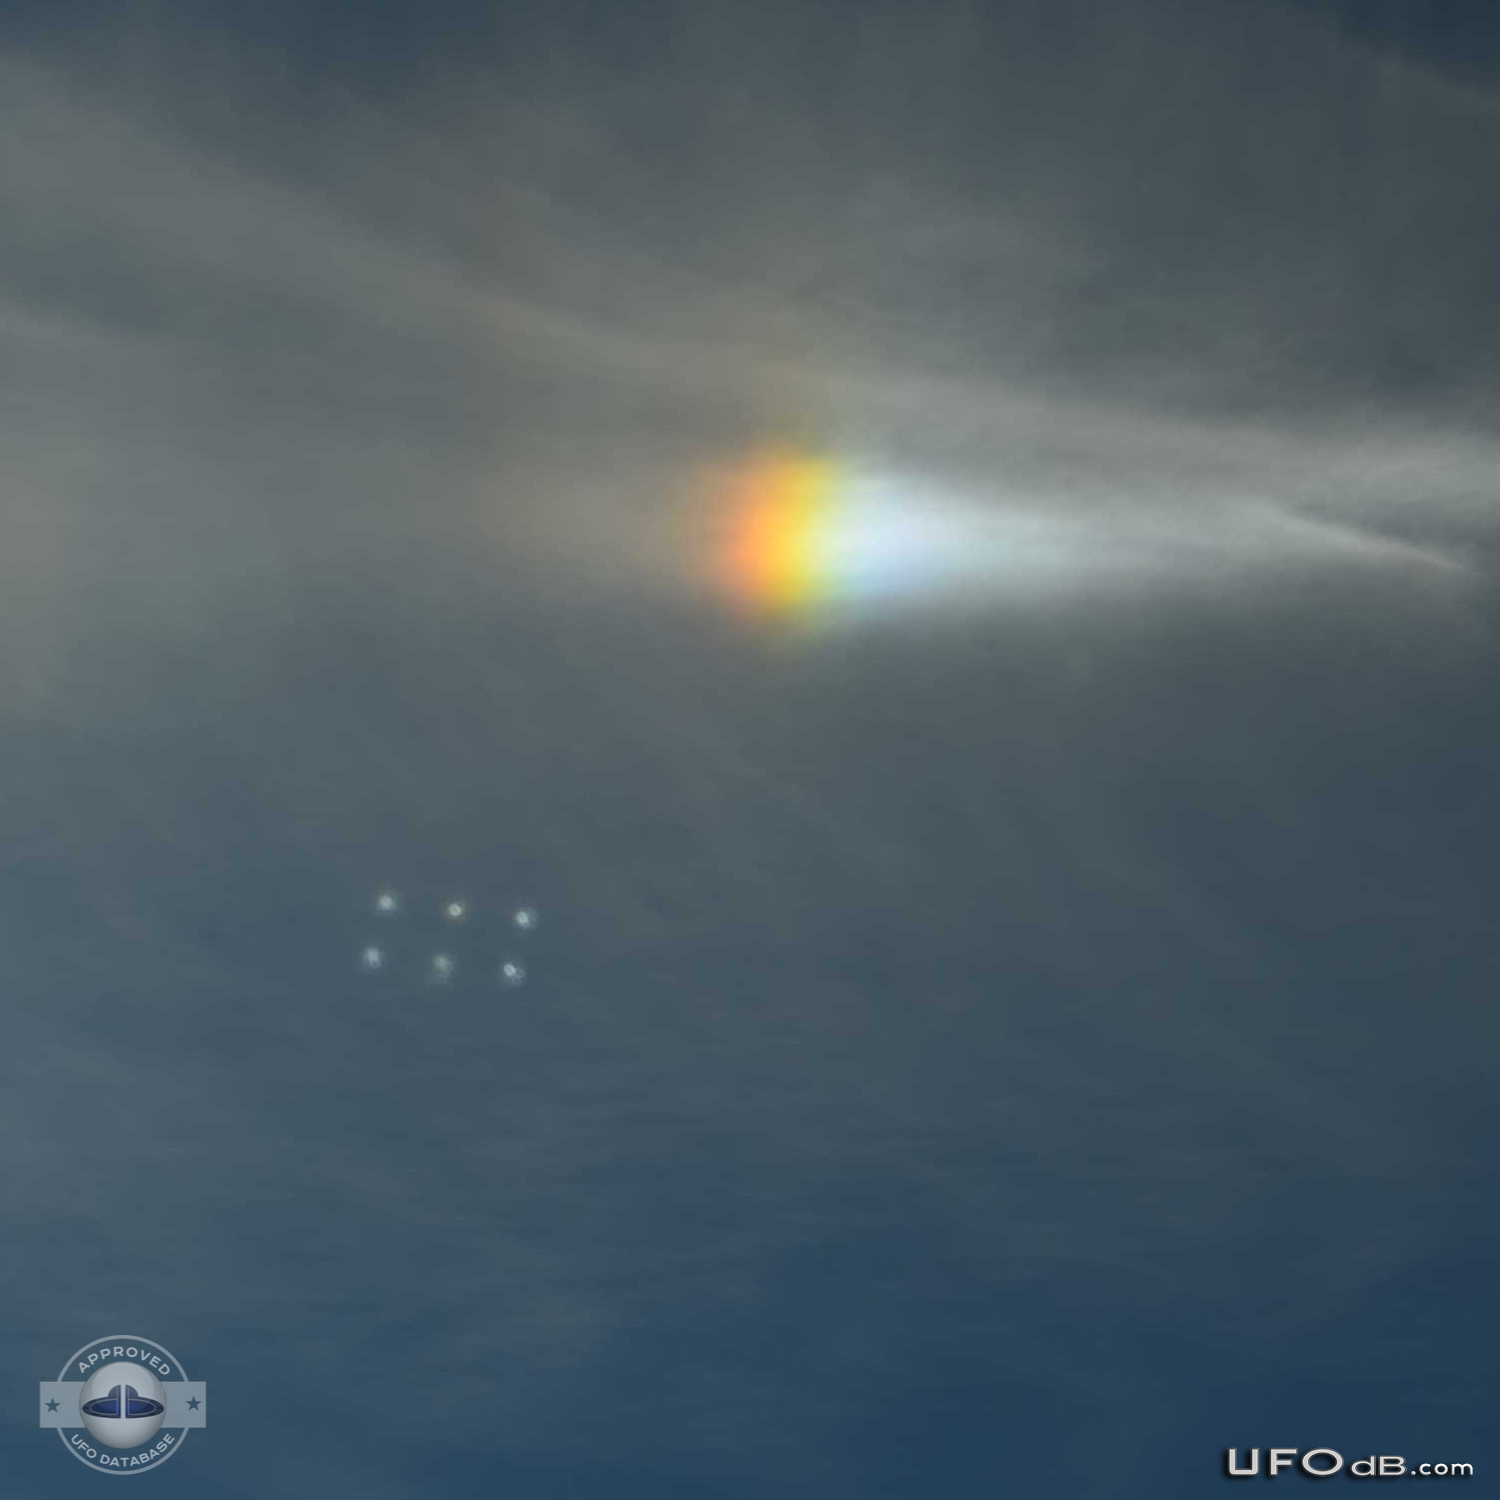 Pictures shot from bus reveals six ufos in a rectangle formation UFO Picture #383-4